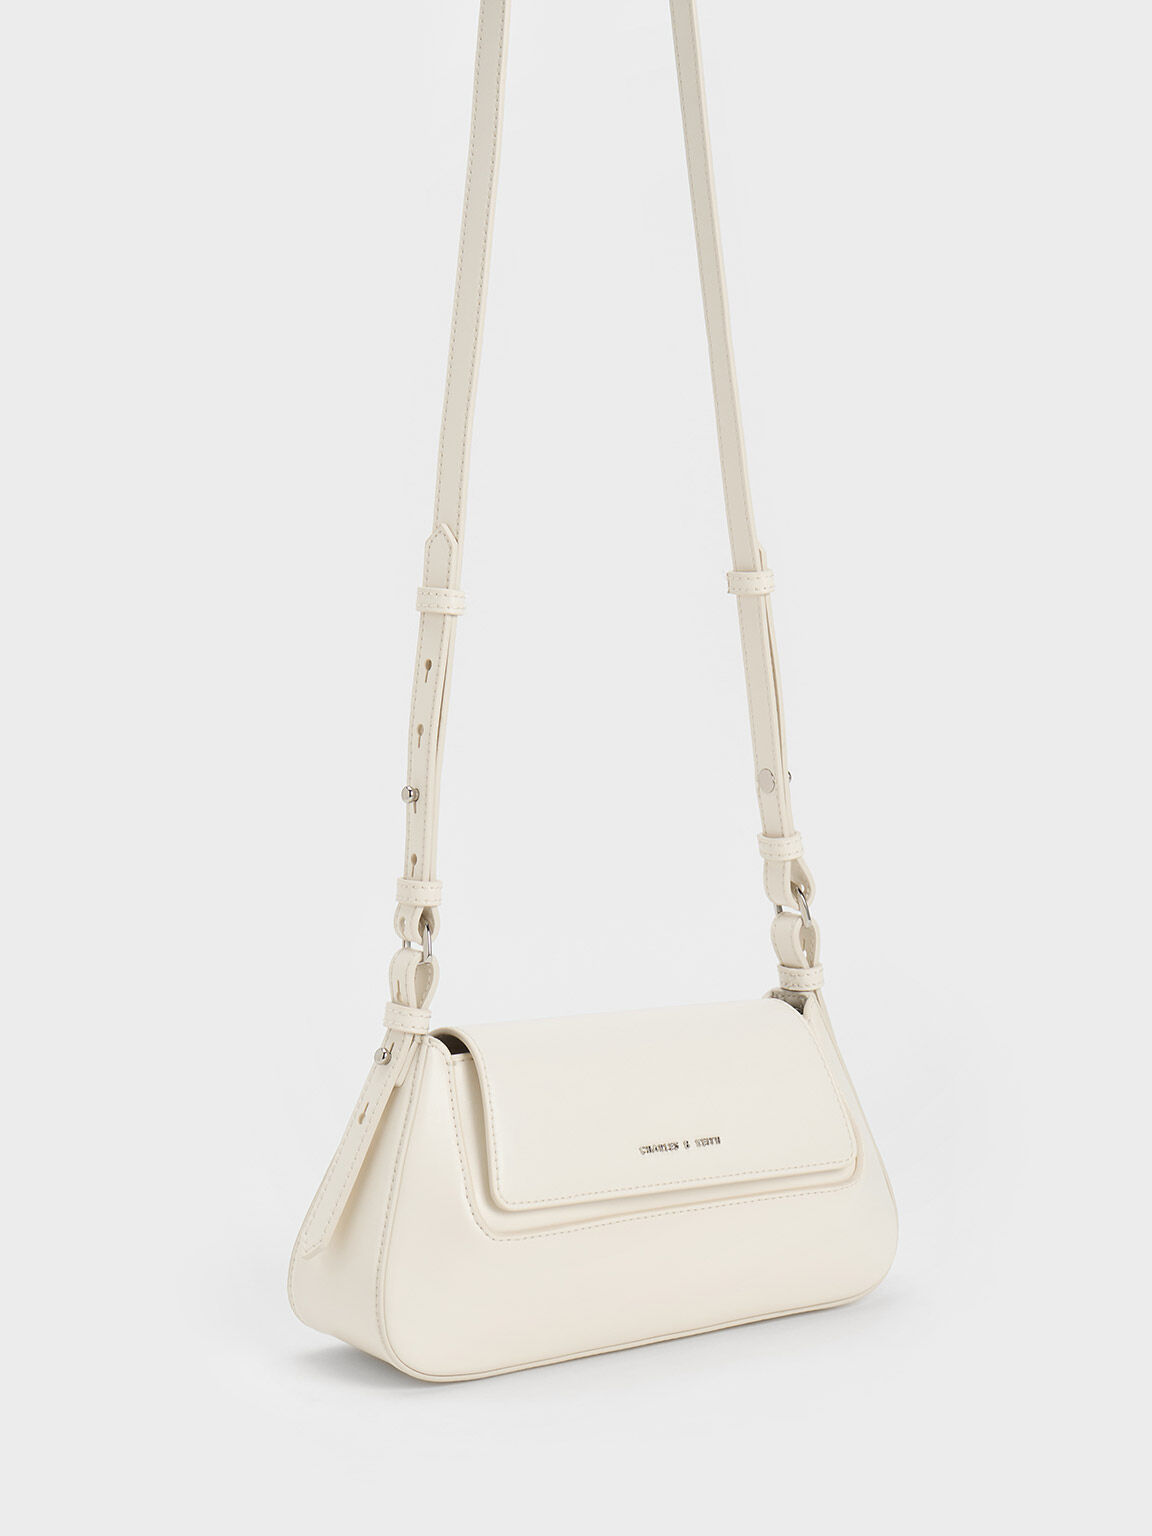 Charles Keith Chain Shoulder Bag Diamond Bag Beige Up To 60% Off